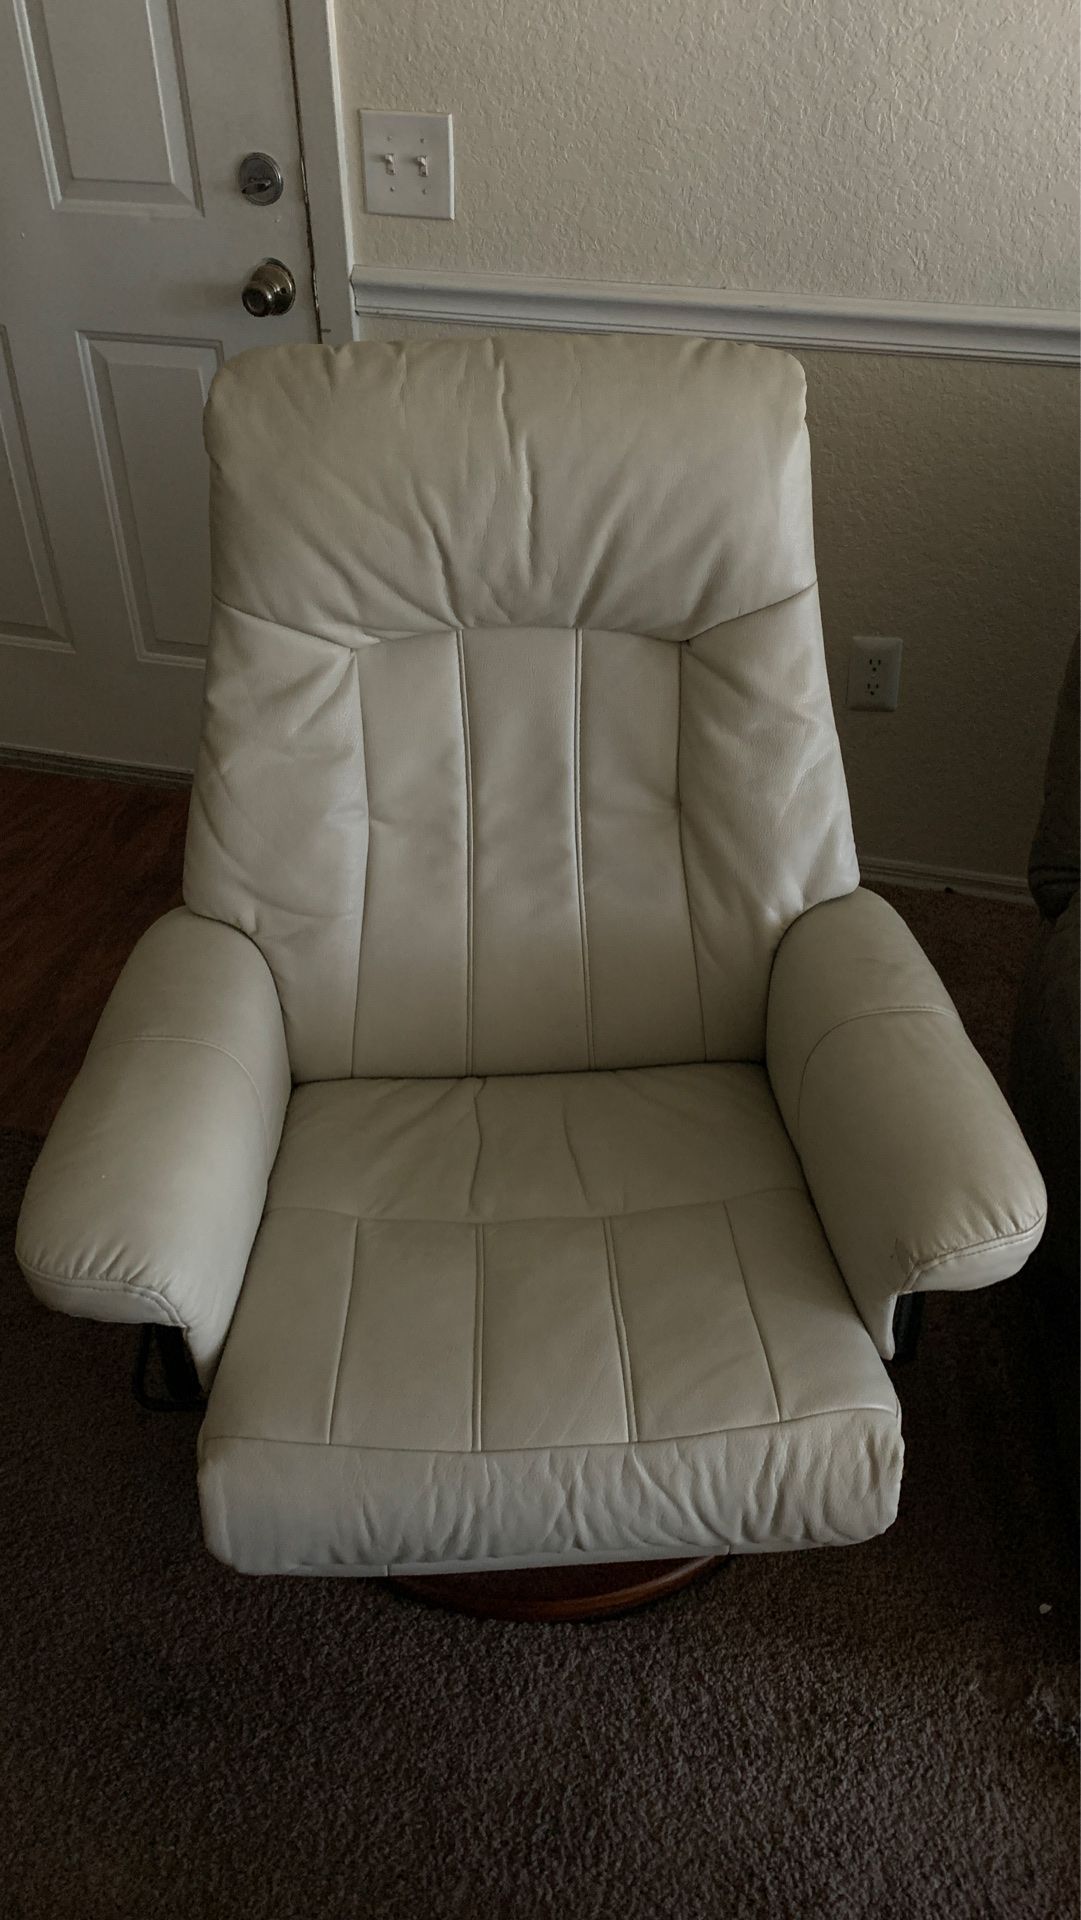 Recliner out of Rv